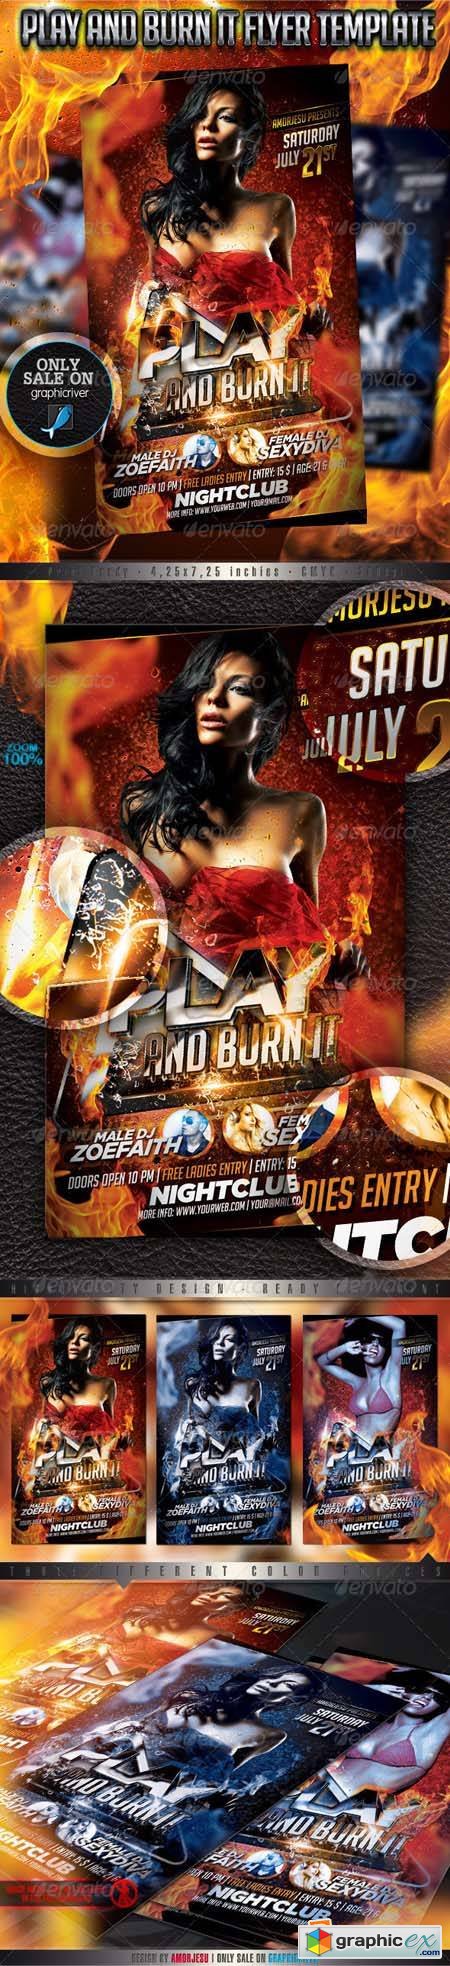 Play And Burn It Flyer Template 2642382